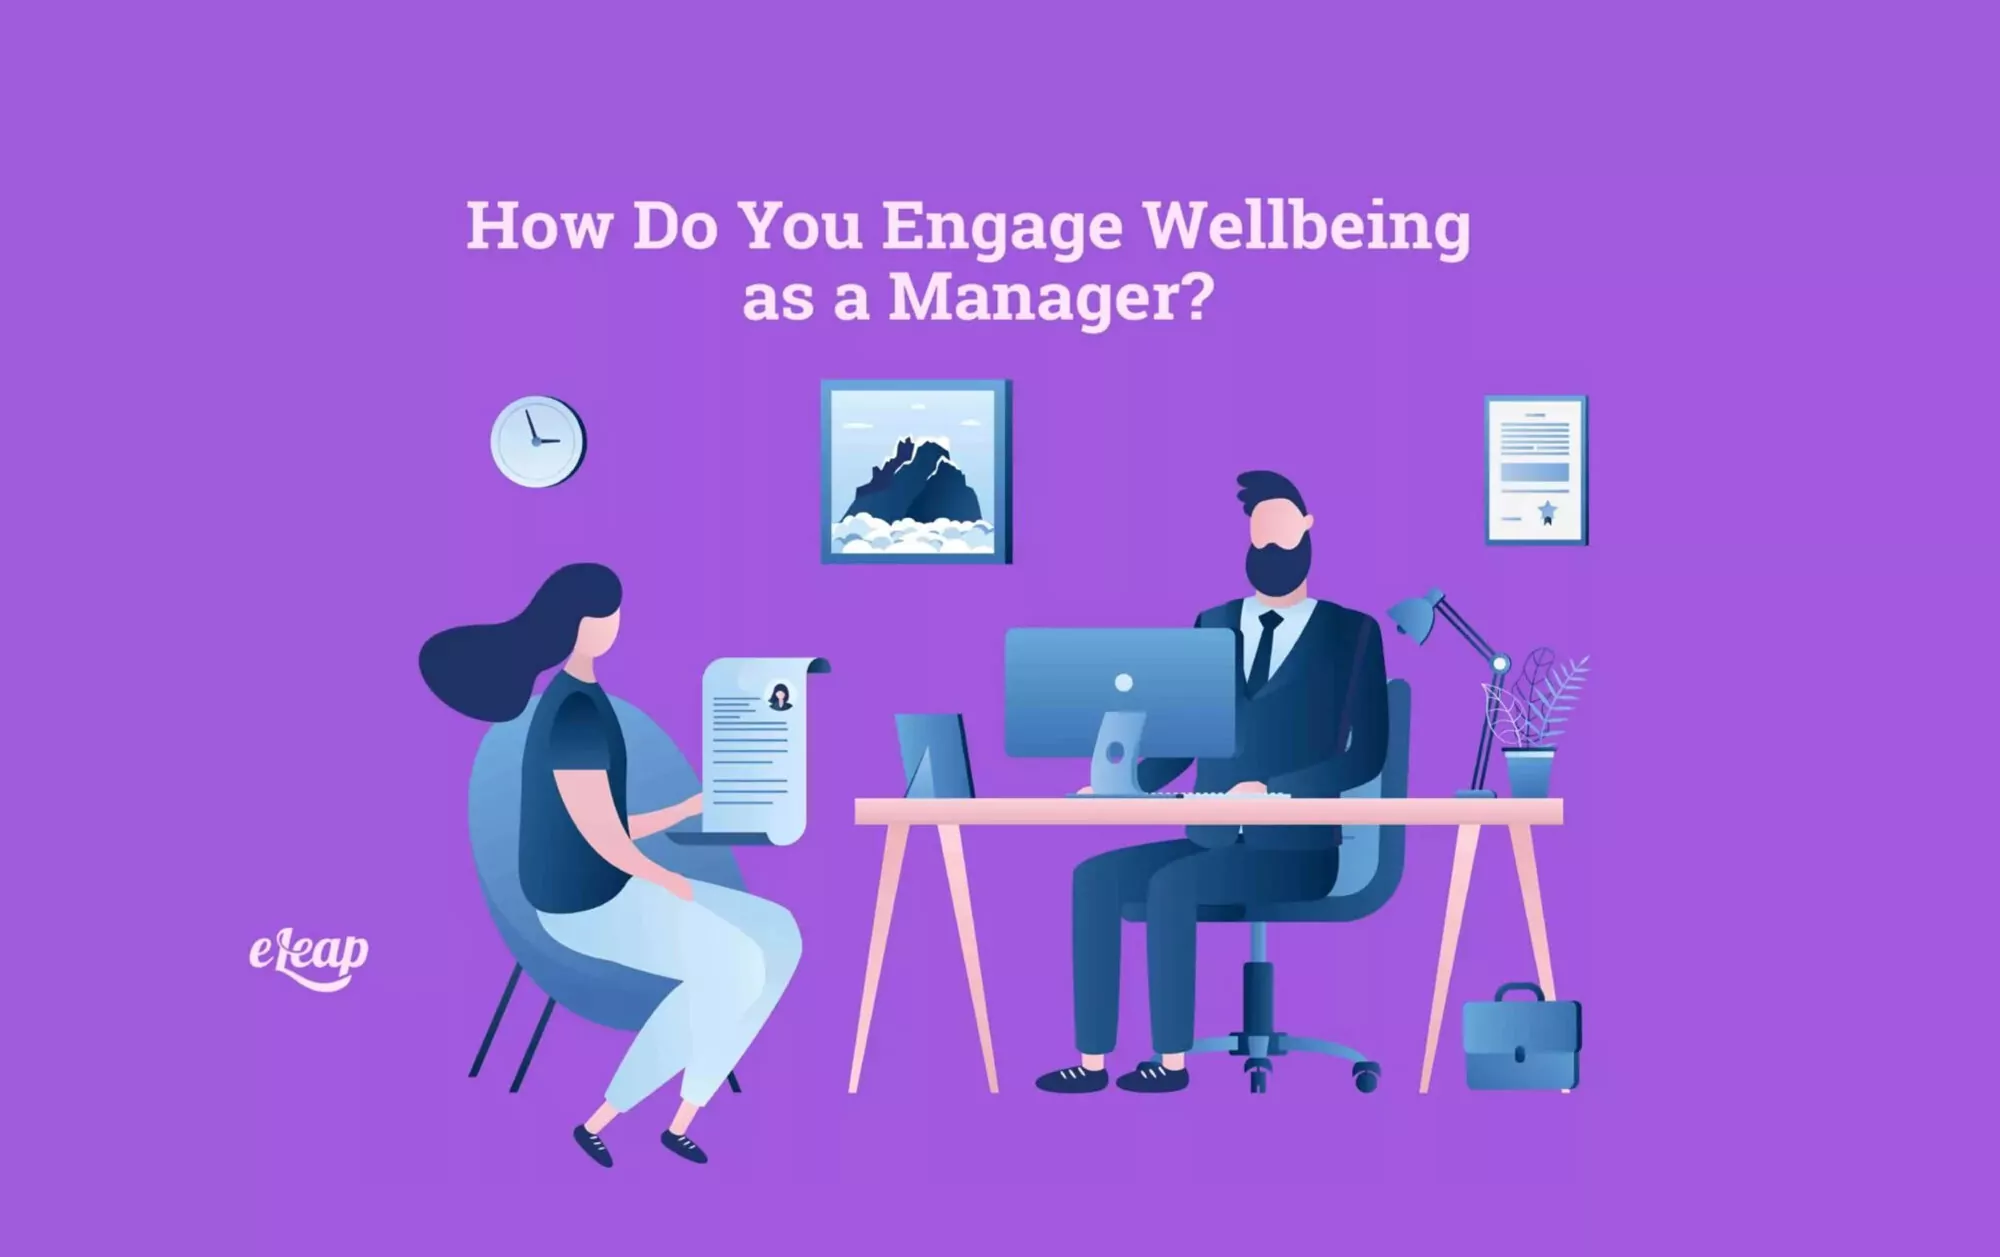 How Do You Engage Wellbeing as a Manager?